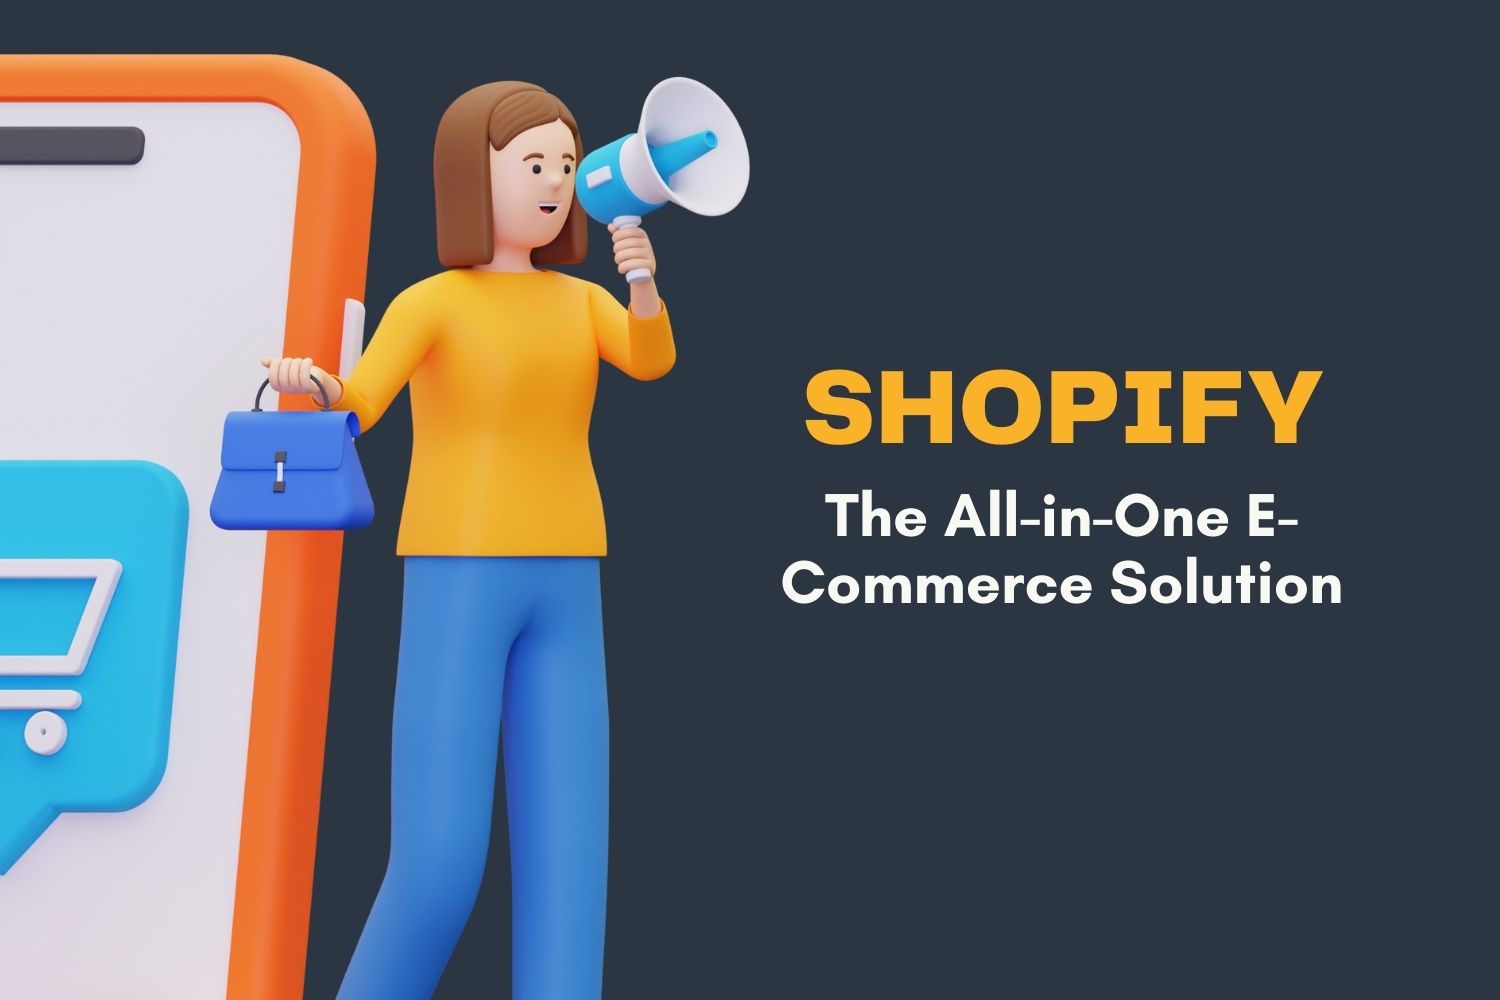 Shopify vs. Squarespace vs. WooCommerce: Which Is Better?
